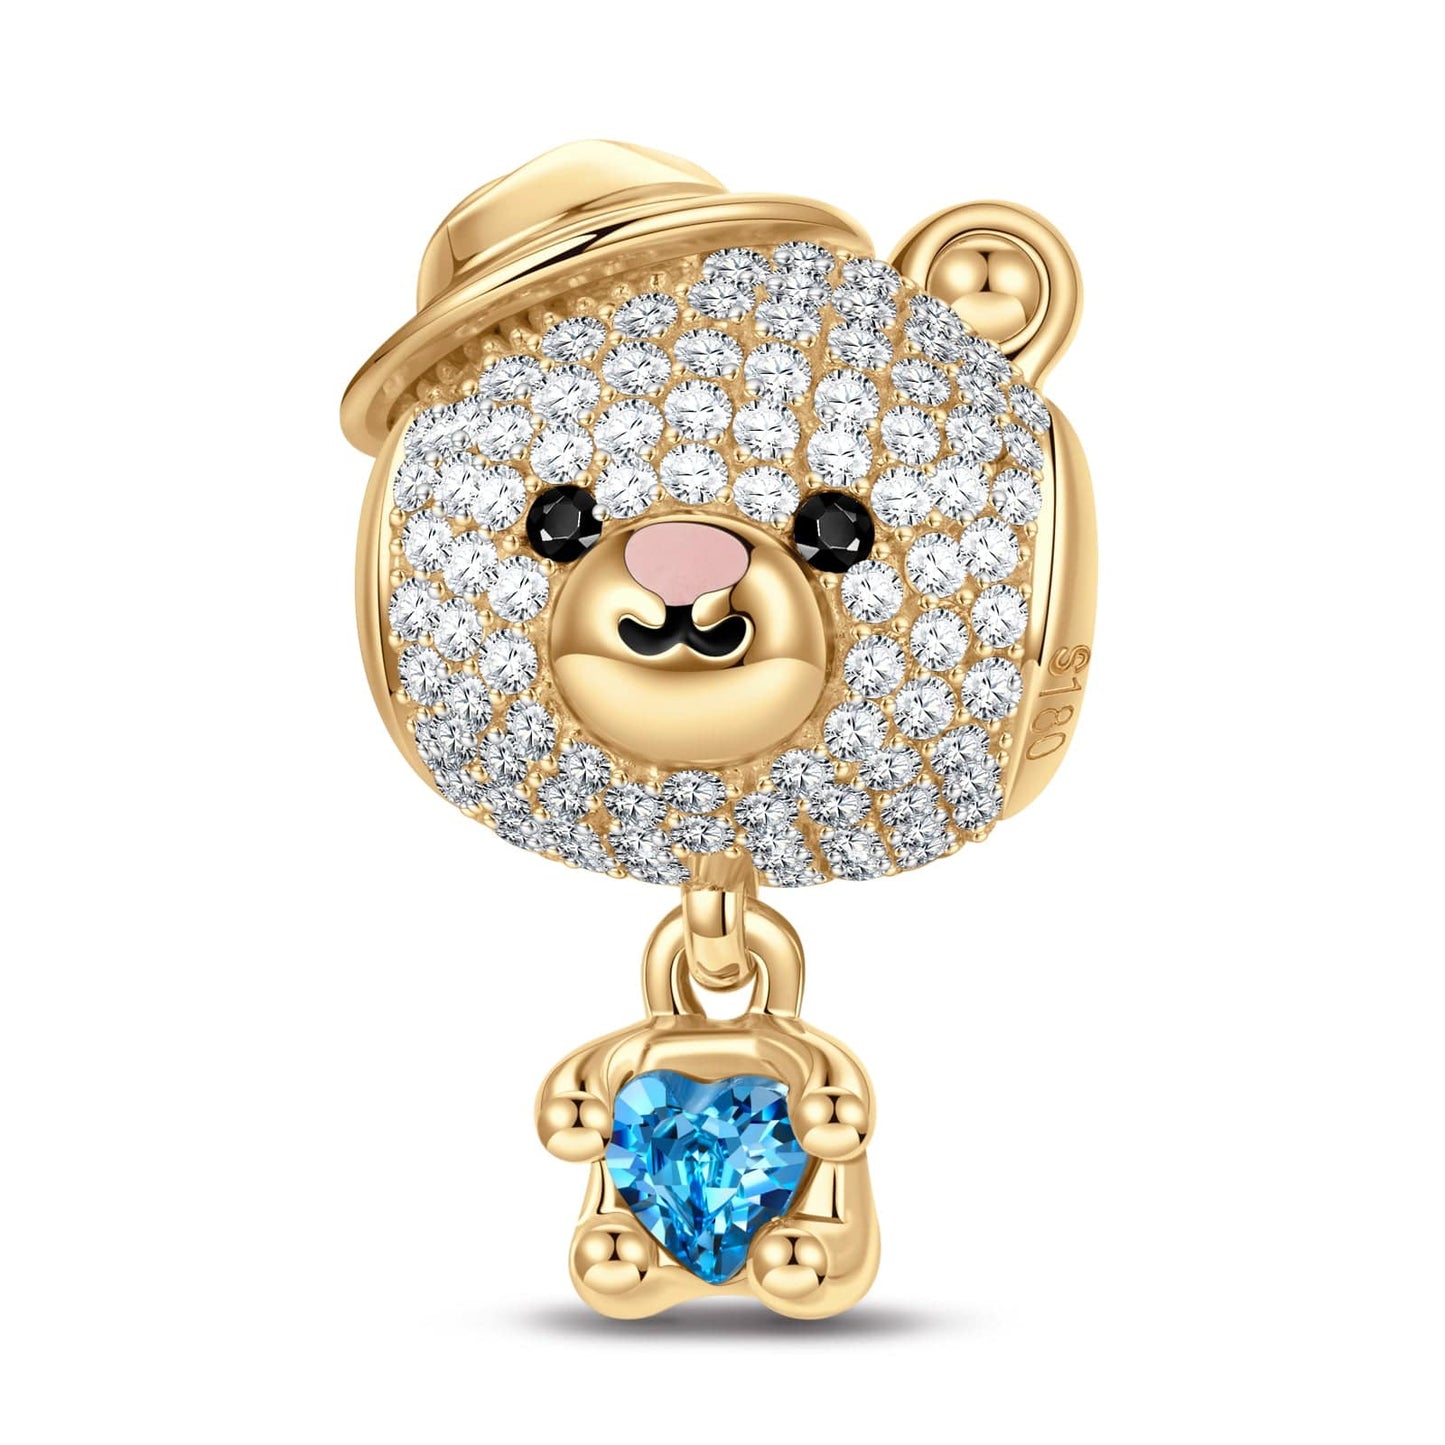 Love Hug Bear Tarnish-resistant Silver Animal Charms With Enamel In 14K Gold Plated - Heartful Hugs Collection